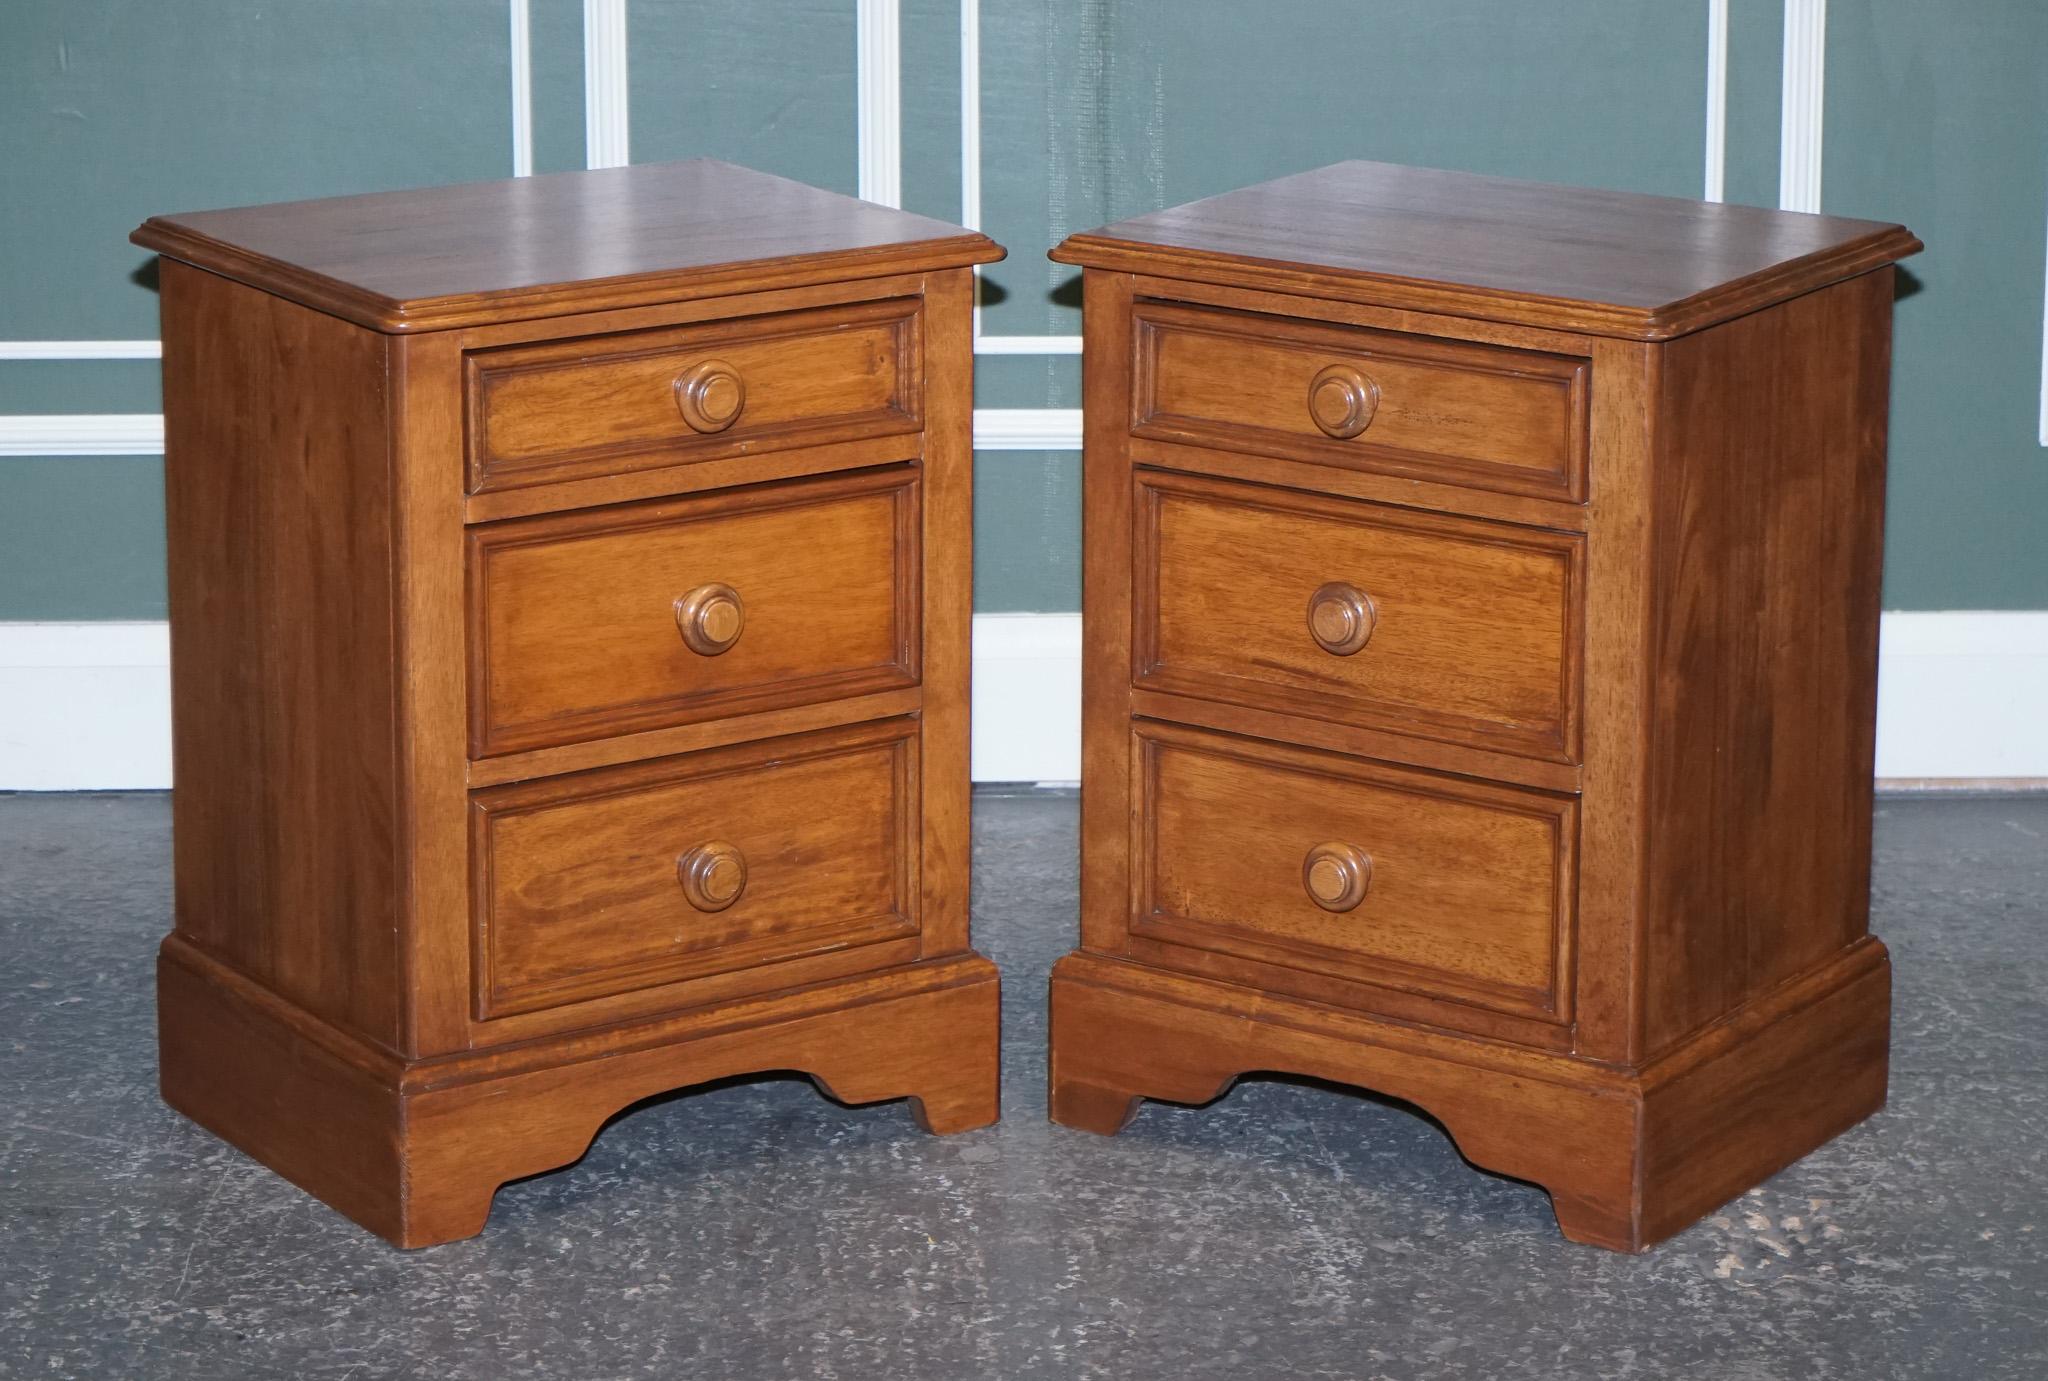 We are delighted to offer for sale this Beautiful Willis & Gambier Pair of Bedside Tables.

We have lightly restored this by giving it a hand clean, hand waxed and hand polished. 

Please carefully look at the pictures to see the condition